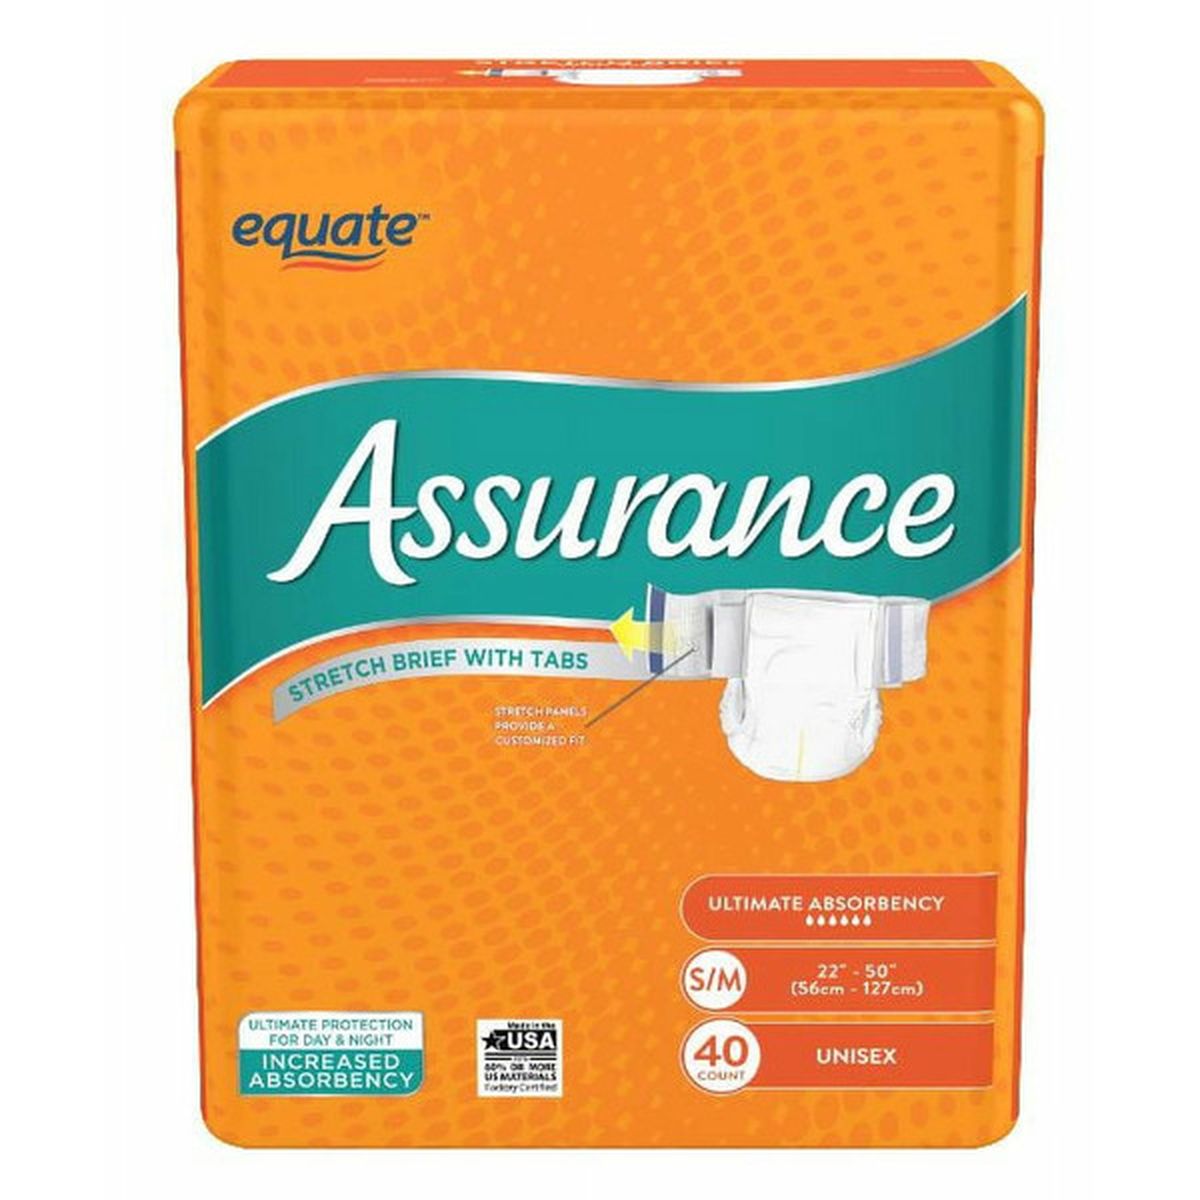 Equate Assurance Ultimate Absorbency Unisex Stretch Brief with